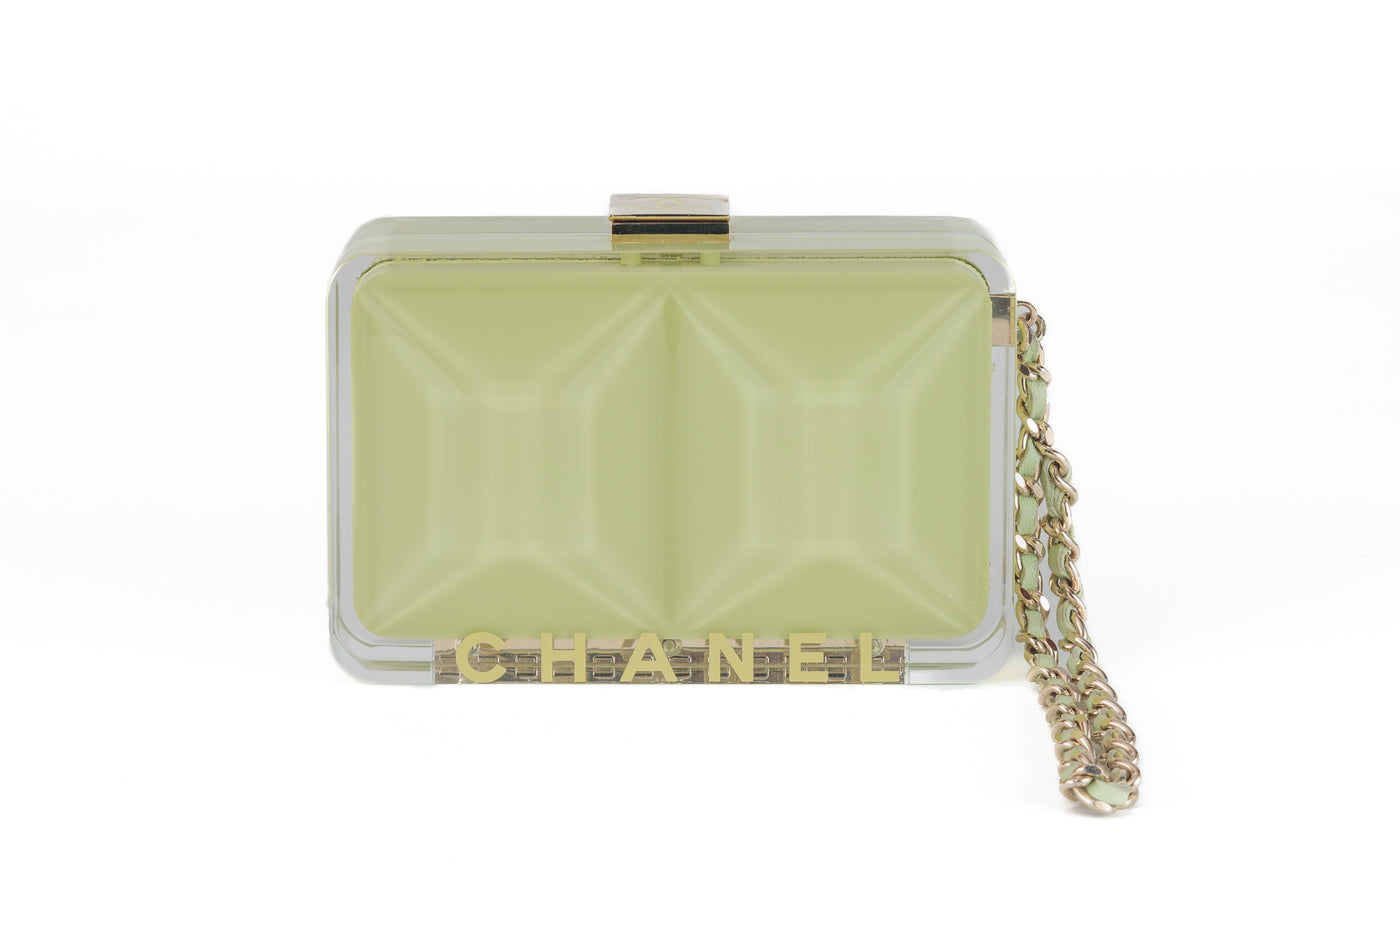 Looking for a vintage Chanel clutch to add to your collection? Look no further than this authentic Mint Green Resin Mini Clutch from the 1984 Runway collection